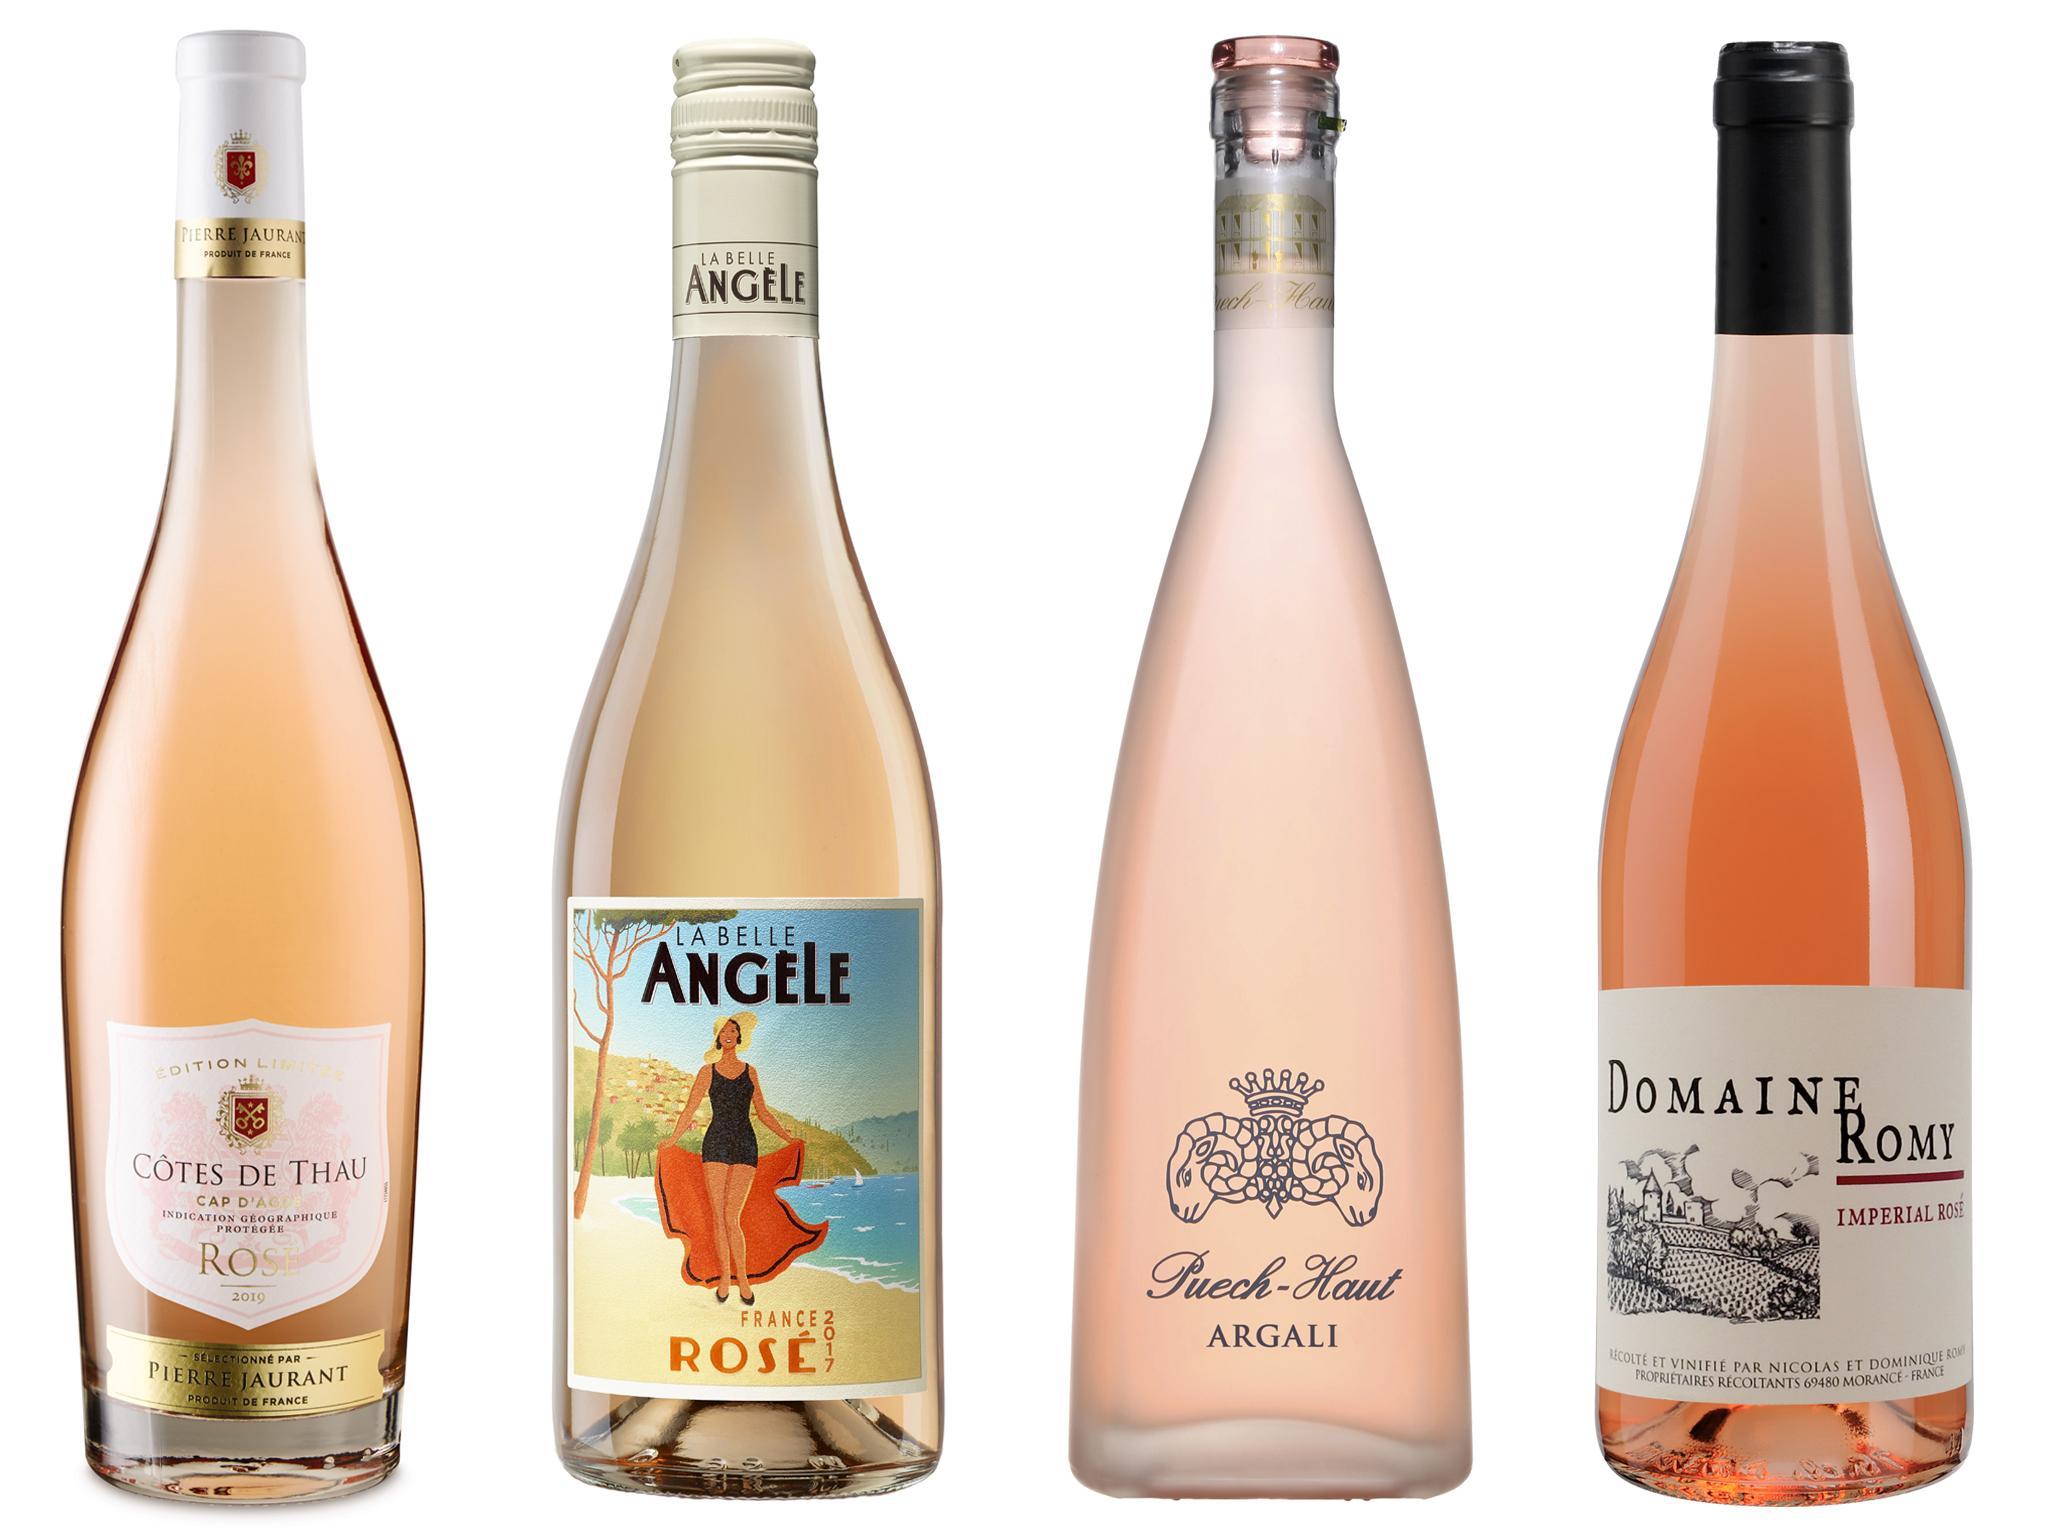 Herbs, light spice and a tangerine tint: the characteristics of Provence rose